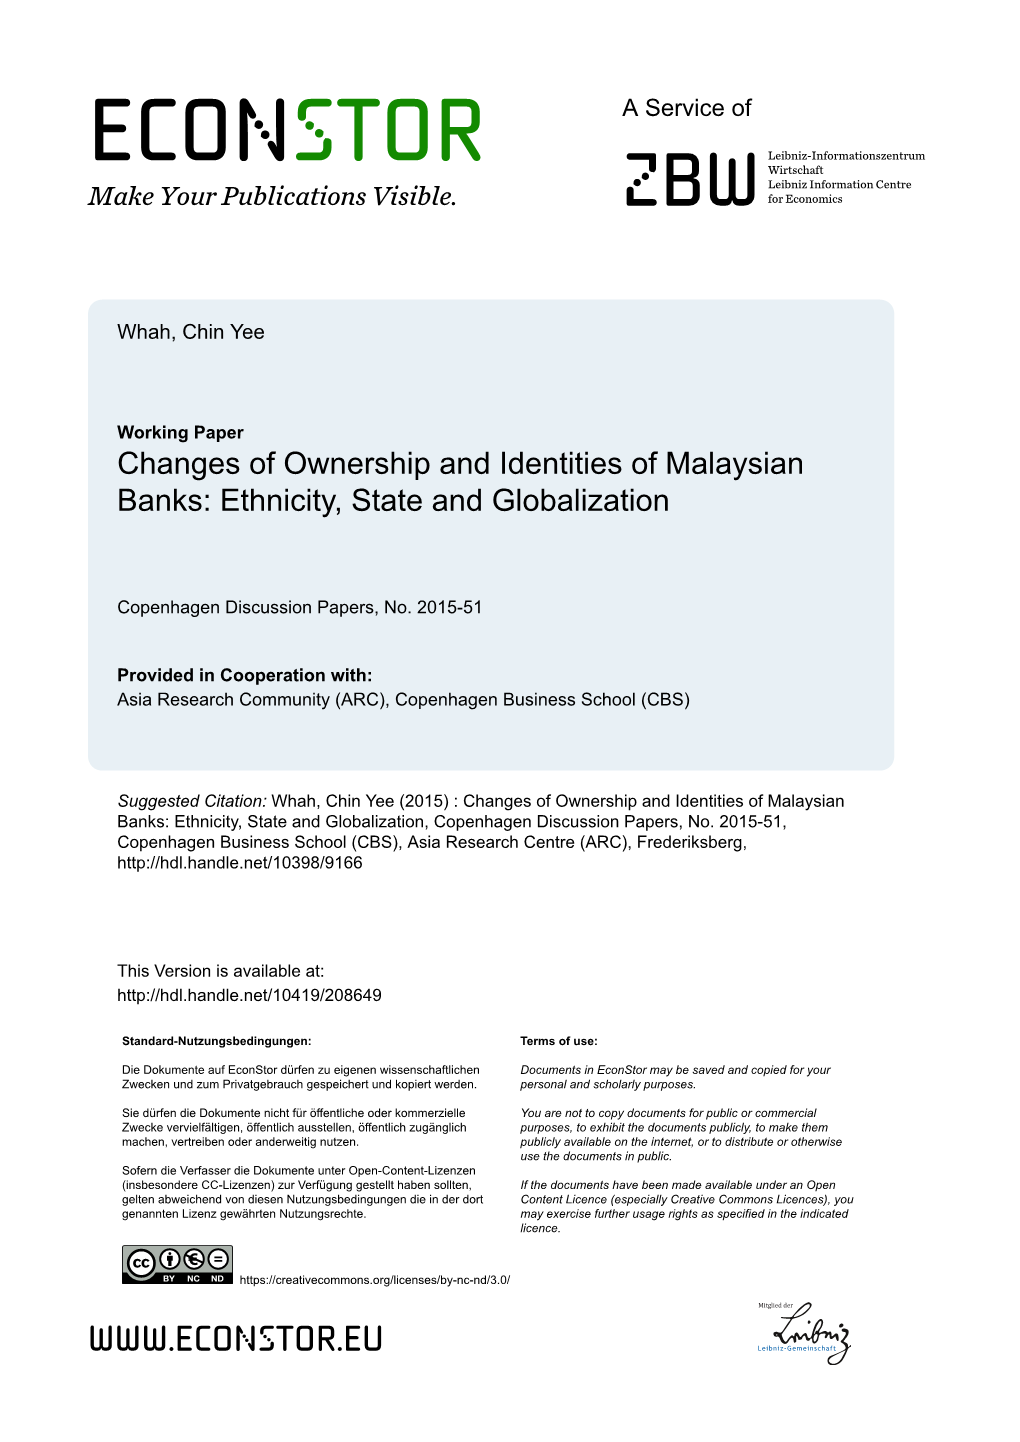 Changes of Ownership and Identities of Malaysian Banks: Ethnicity, State and Globalization